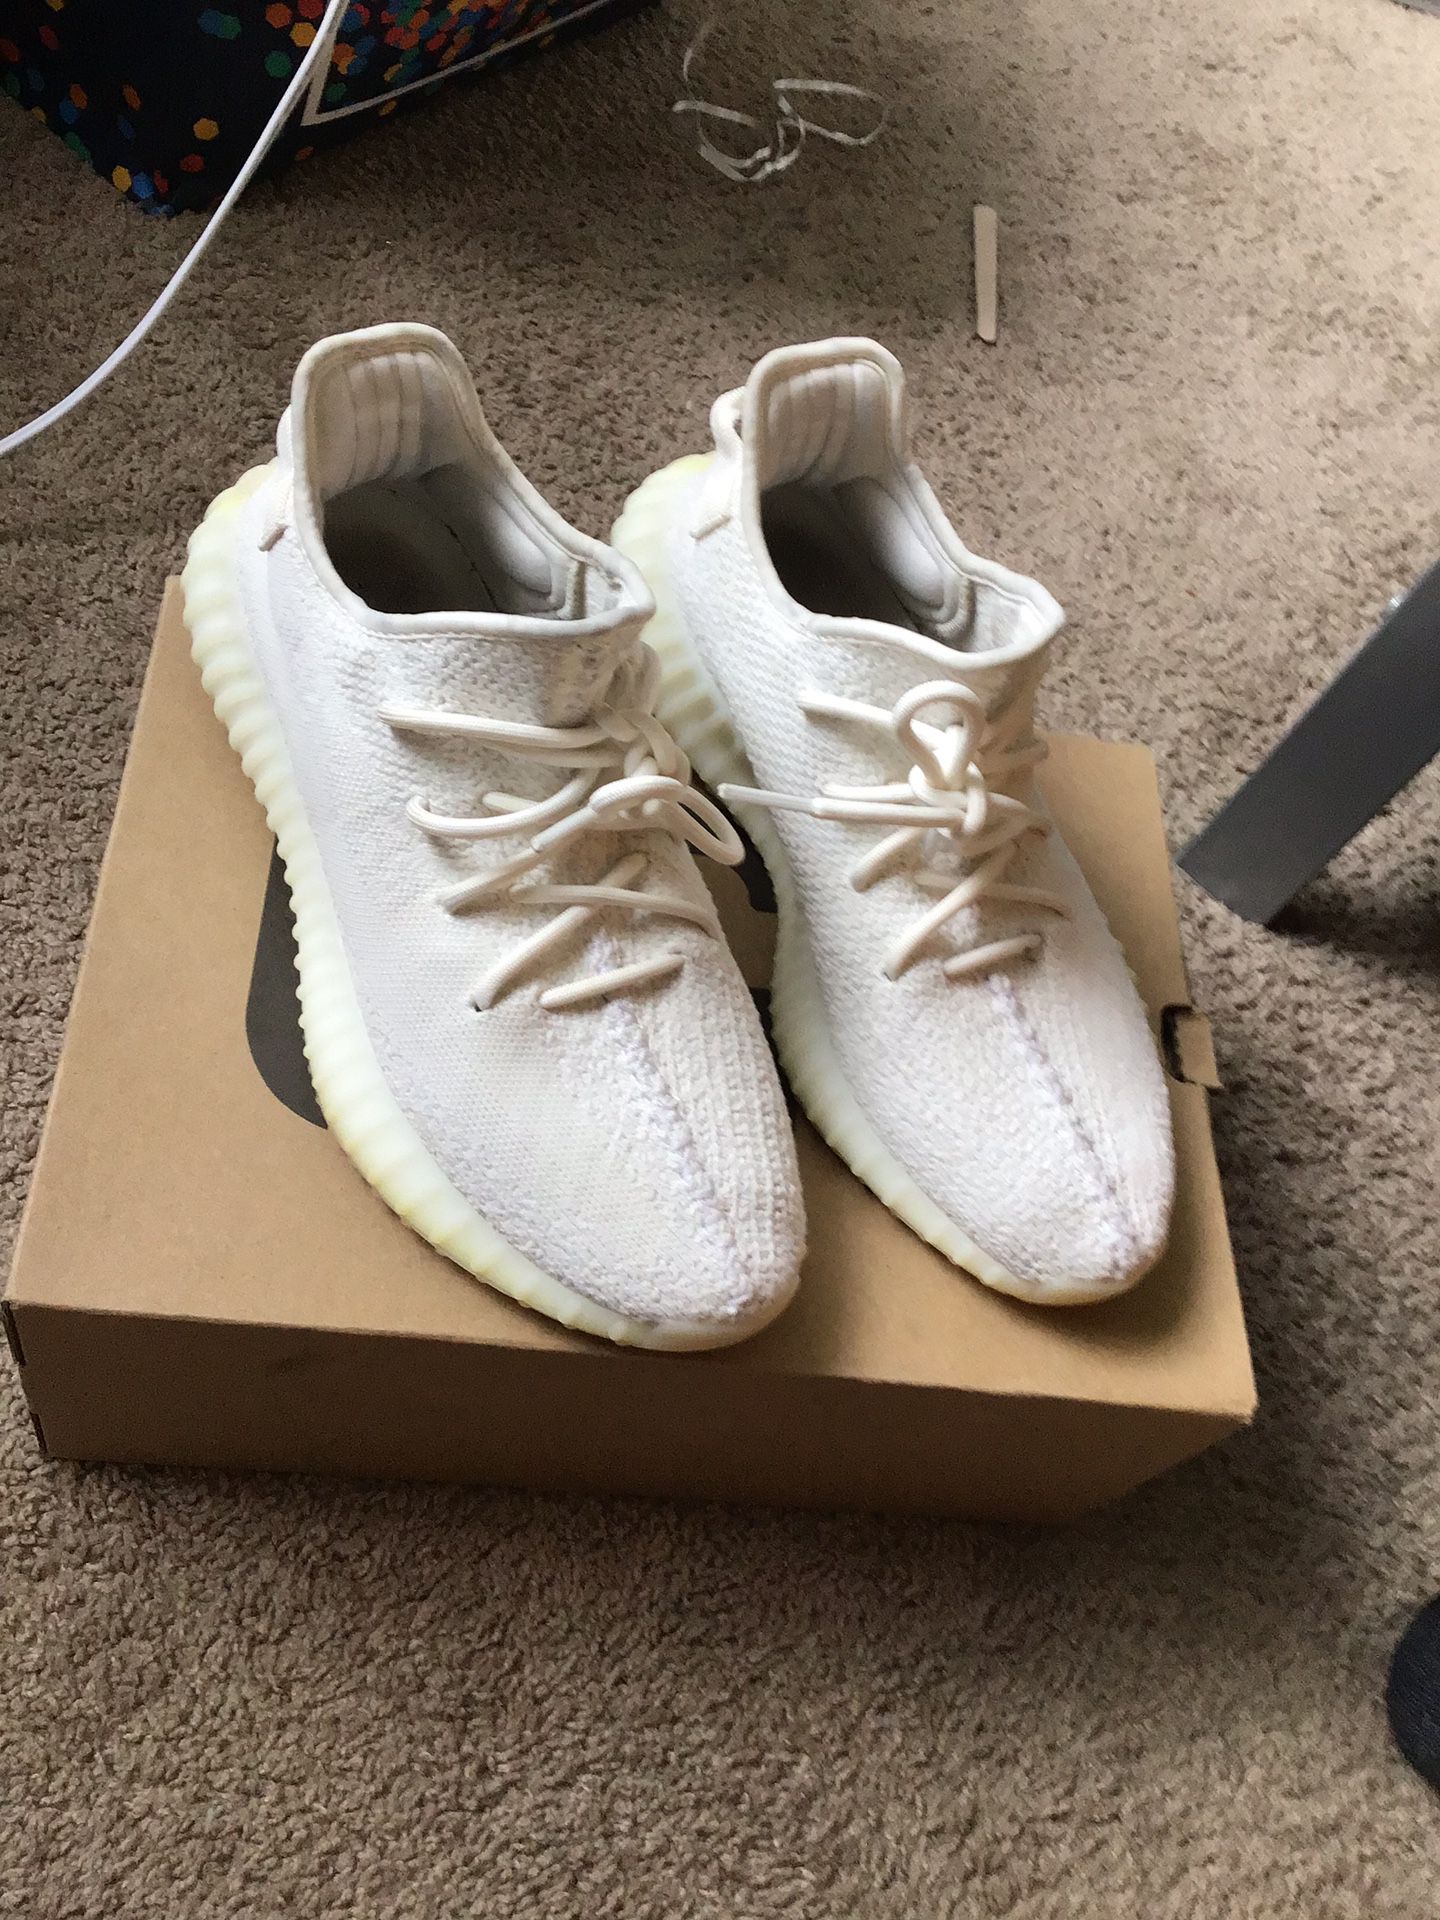 YEEZY BOOTS 350 V2